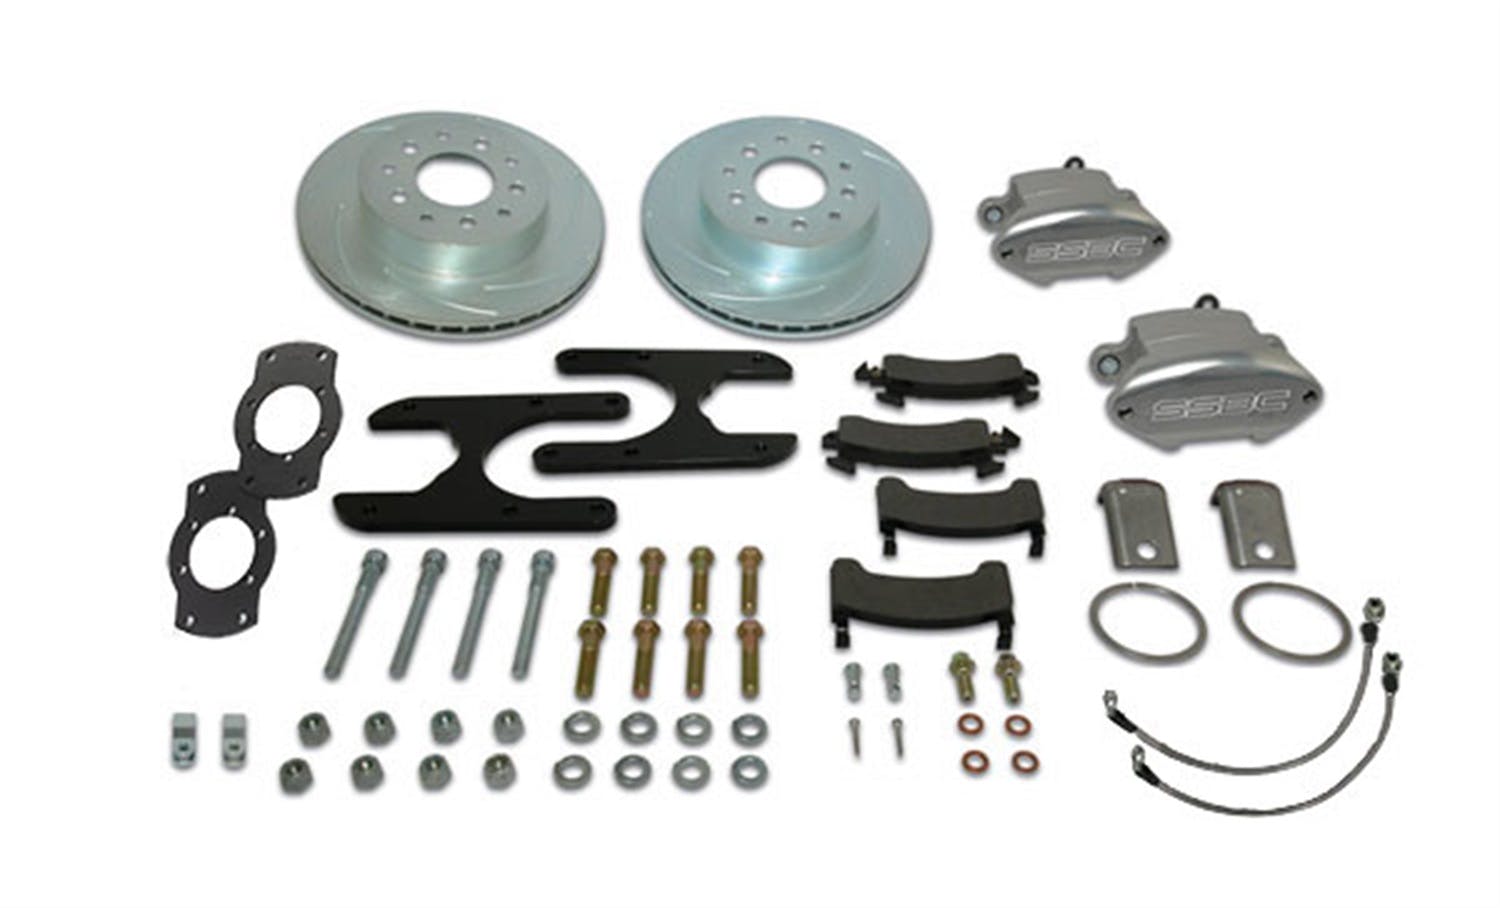 Stainless Steel Brakes A111-21BK Kit A111-21 w/black calipers